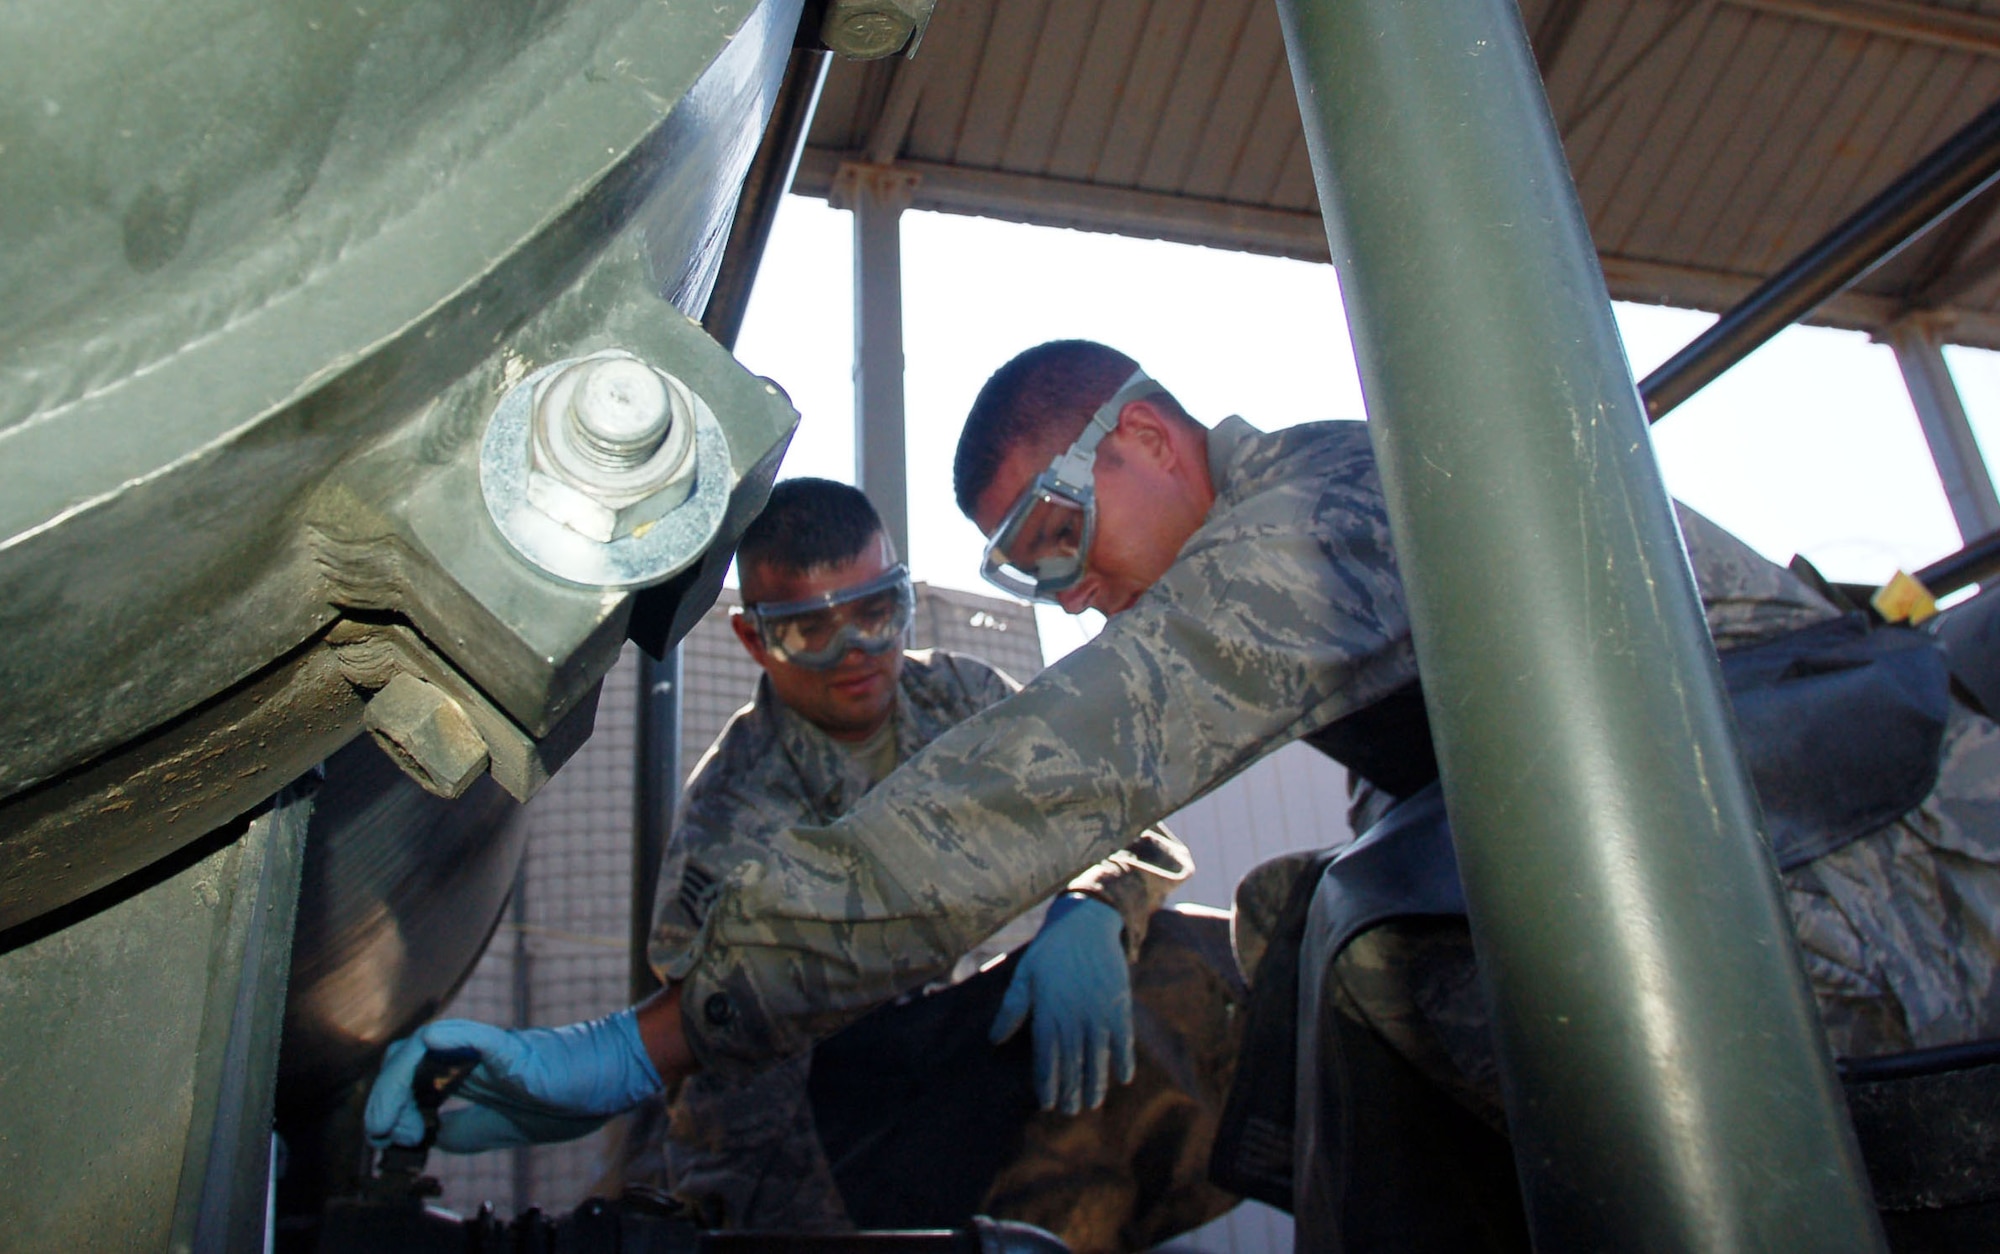 TRANSIT CENTER AT MANAS, Kyrgyzstan – Staff Sgt. Gregory Bailey and Senior Airman Samuel Wickersham, 376th Expeditionary Logistics Readiness Squadron’s petroleum, oil and lubricants Airmen, drain a fuel filter system through a valve to check jet fuel for foreign particles and contaminations at the Transit Center at Manas July 15, 2009. The POL team recently broke refueling records at Manas, after pumping over 10 million gallons. Sergeant Bailey and Airman Wickersham’s duty on a daily basis is to ensure jet fuel meets Air Force specifications by injecting three fuel enhancing chemicals, namely: Fuel System Icing Inhibitor, Corrosion Inhibitor and Static Dissipater Additive. The two Airmen are deployed from Aviano Air Base, Italy.  (U.S. Air Force photo/Staff Sgt. Olufemi Owolabi) 